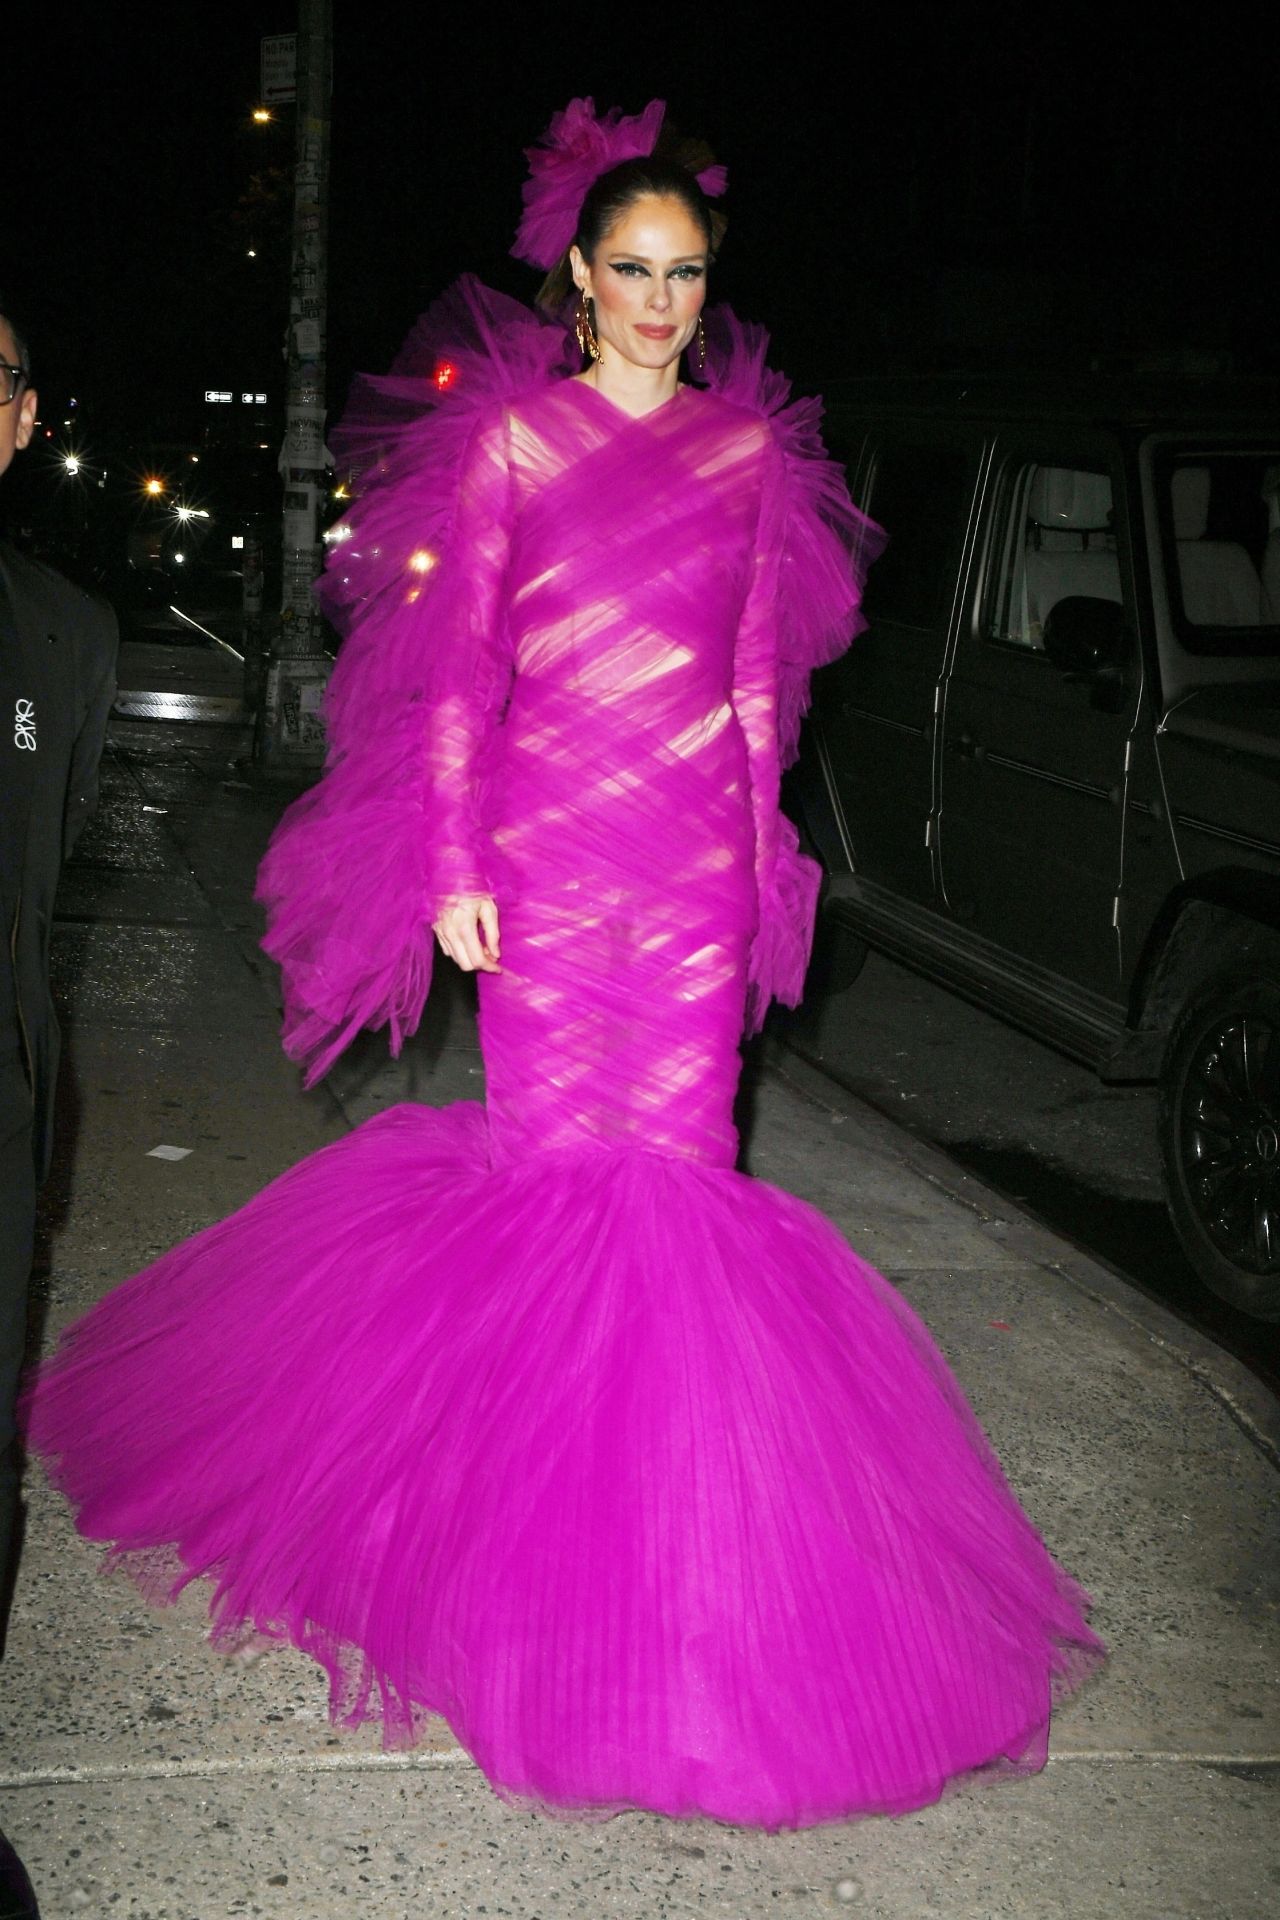 COCO ROCHA AT THE THE MULBERRY BAR FOR A MET GALA AFTER PARTY IN NEW YORK1